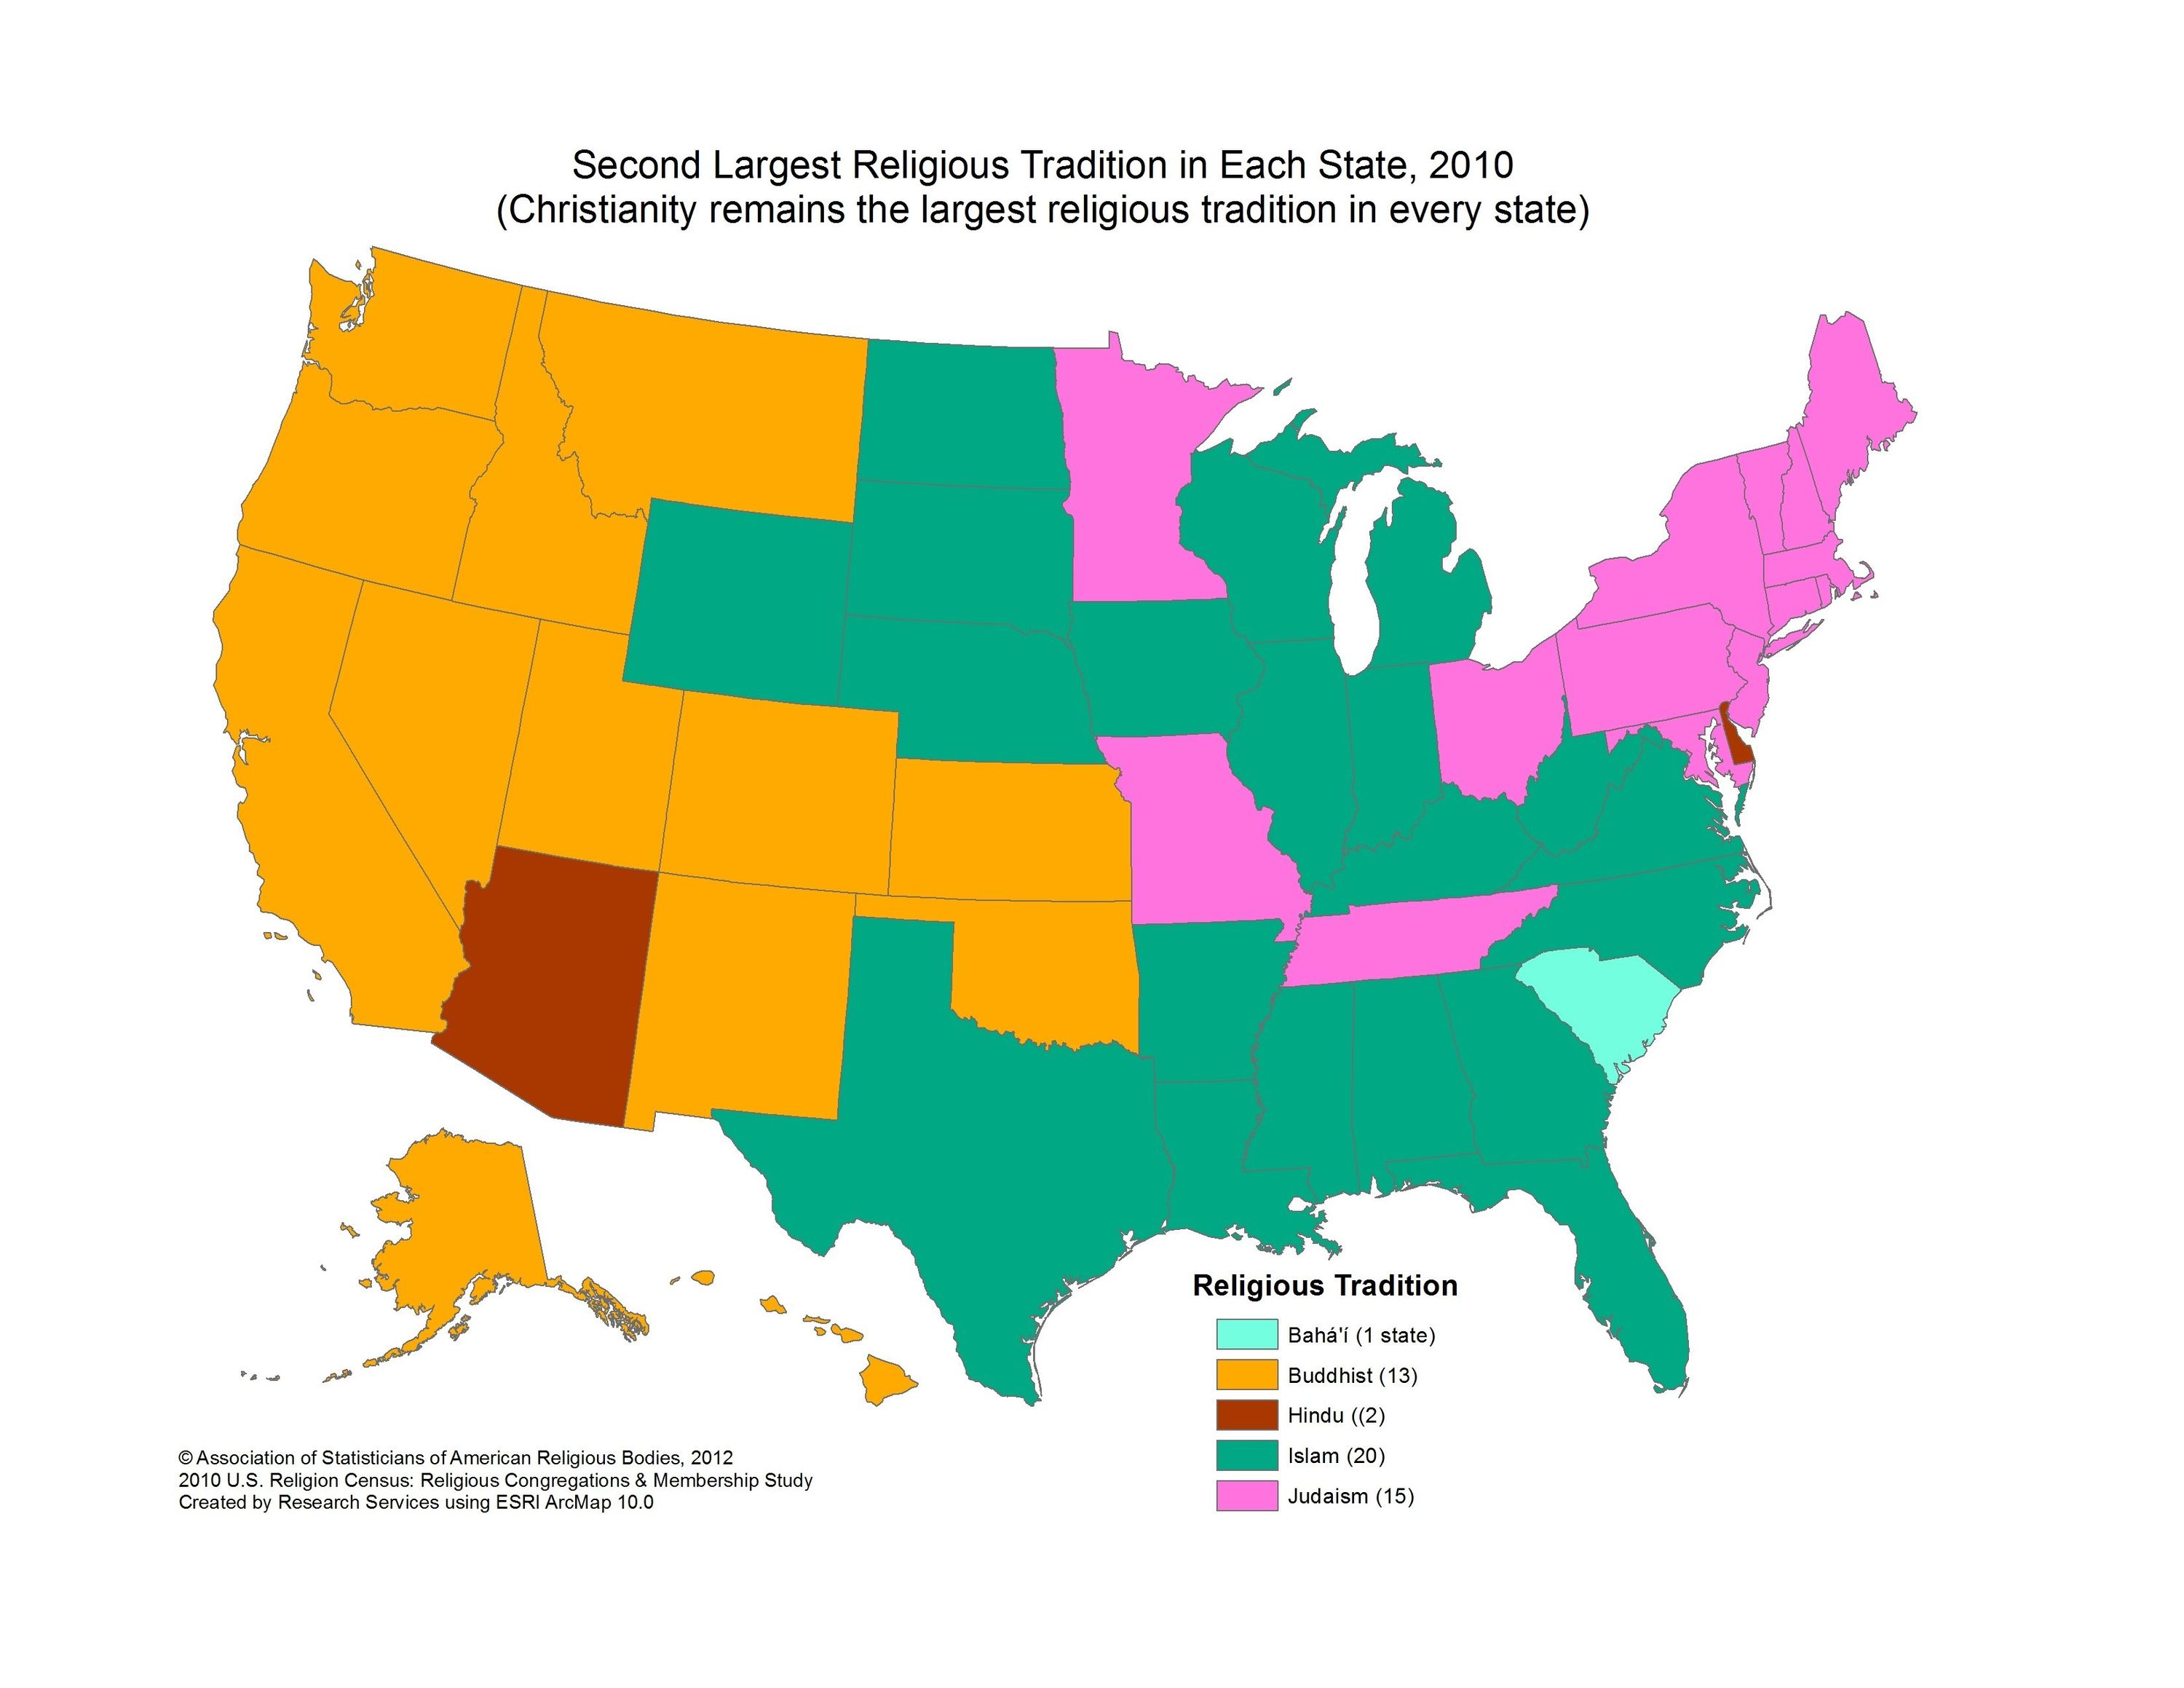 Second largest religion in each US state